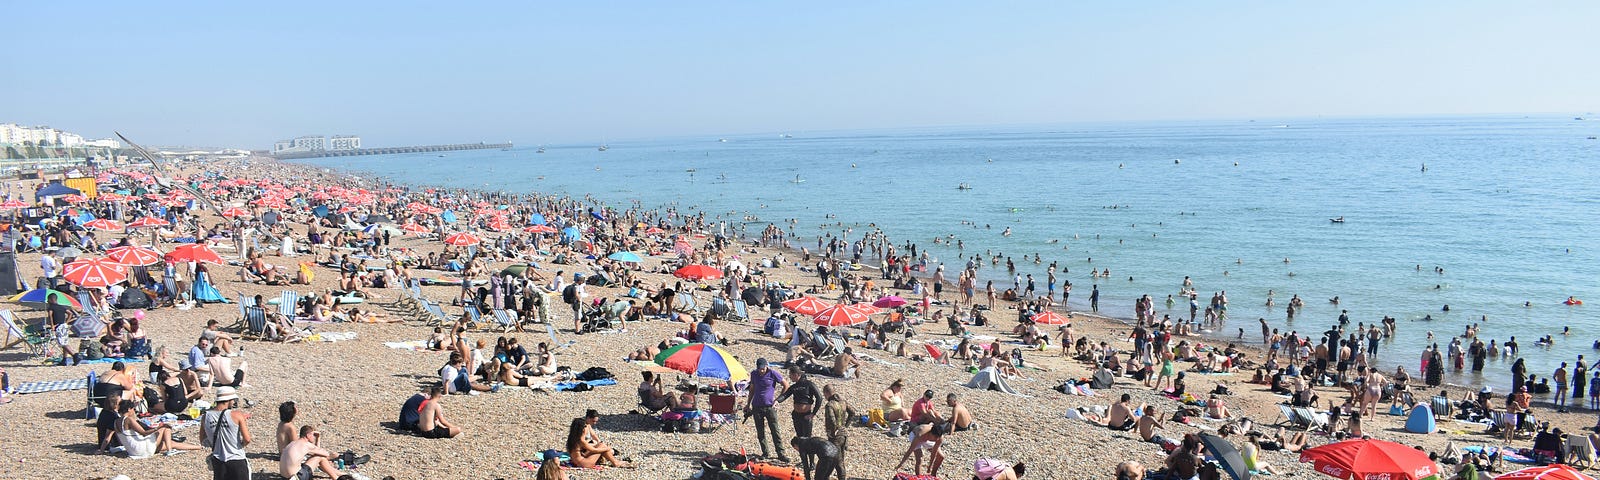 Crowds on Brighton beach and in the sea, on a hot day with a cloudless sky in the UK.